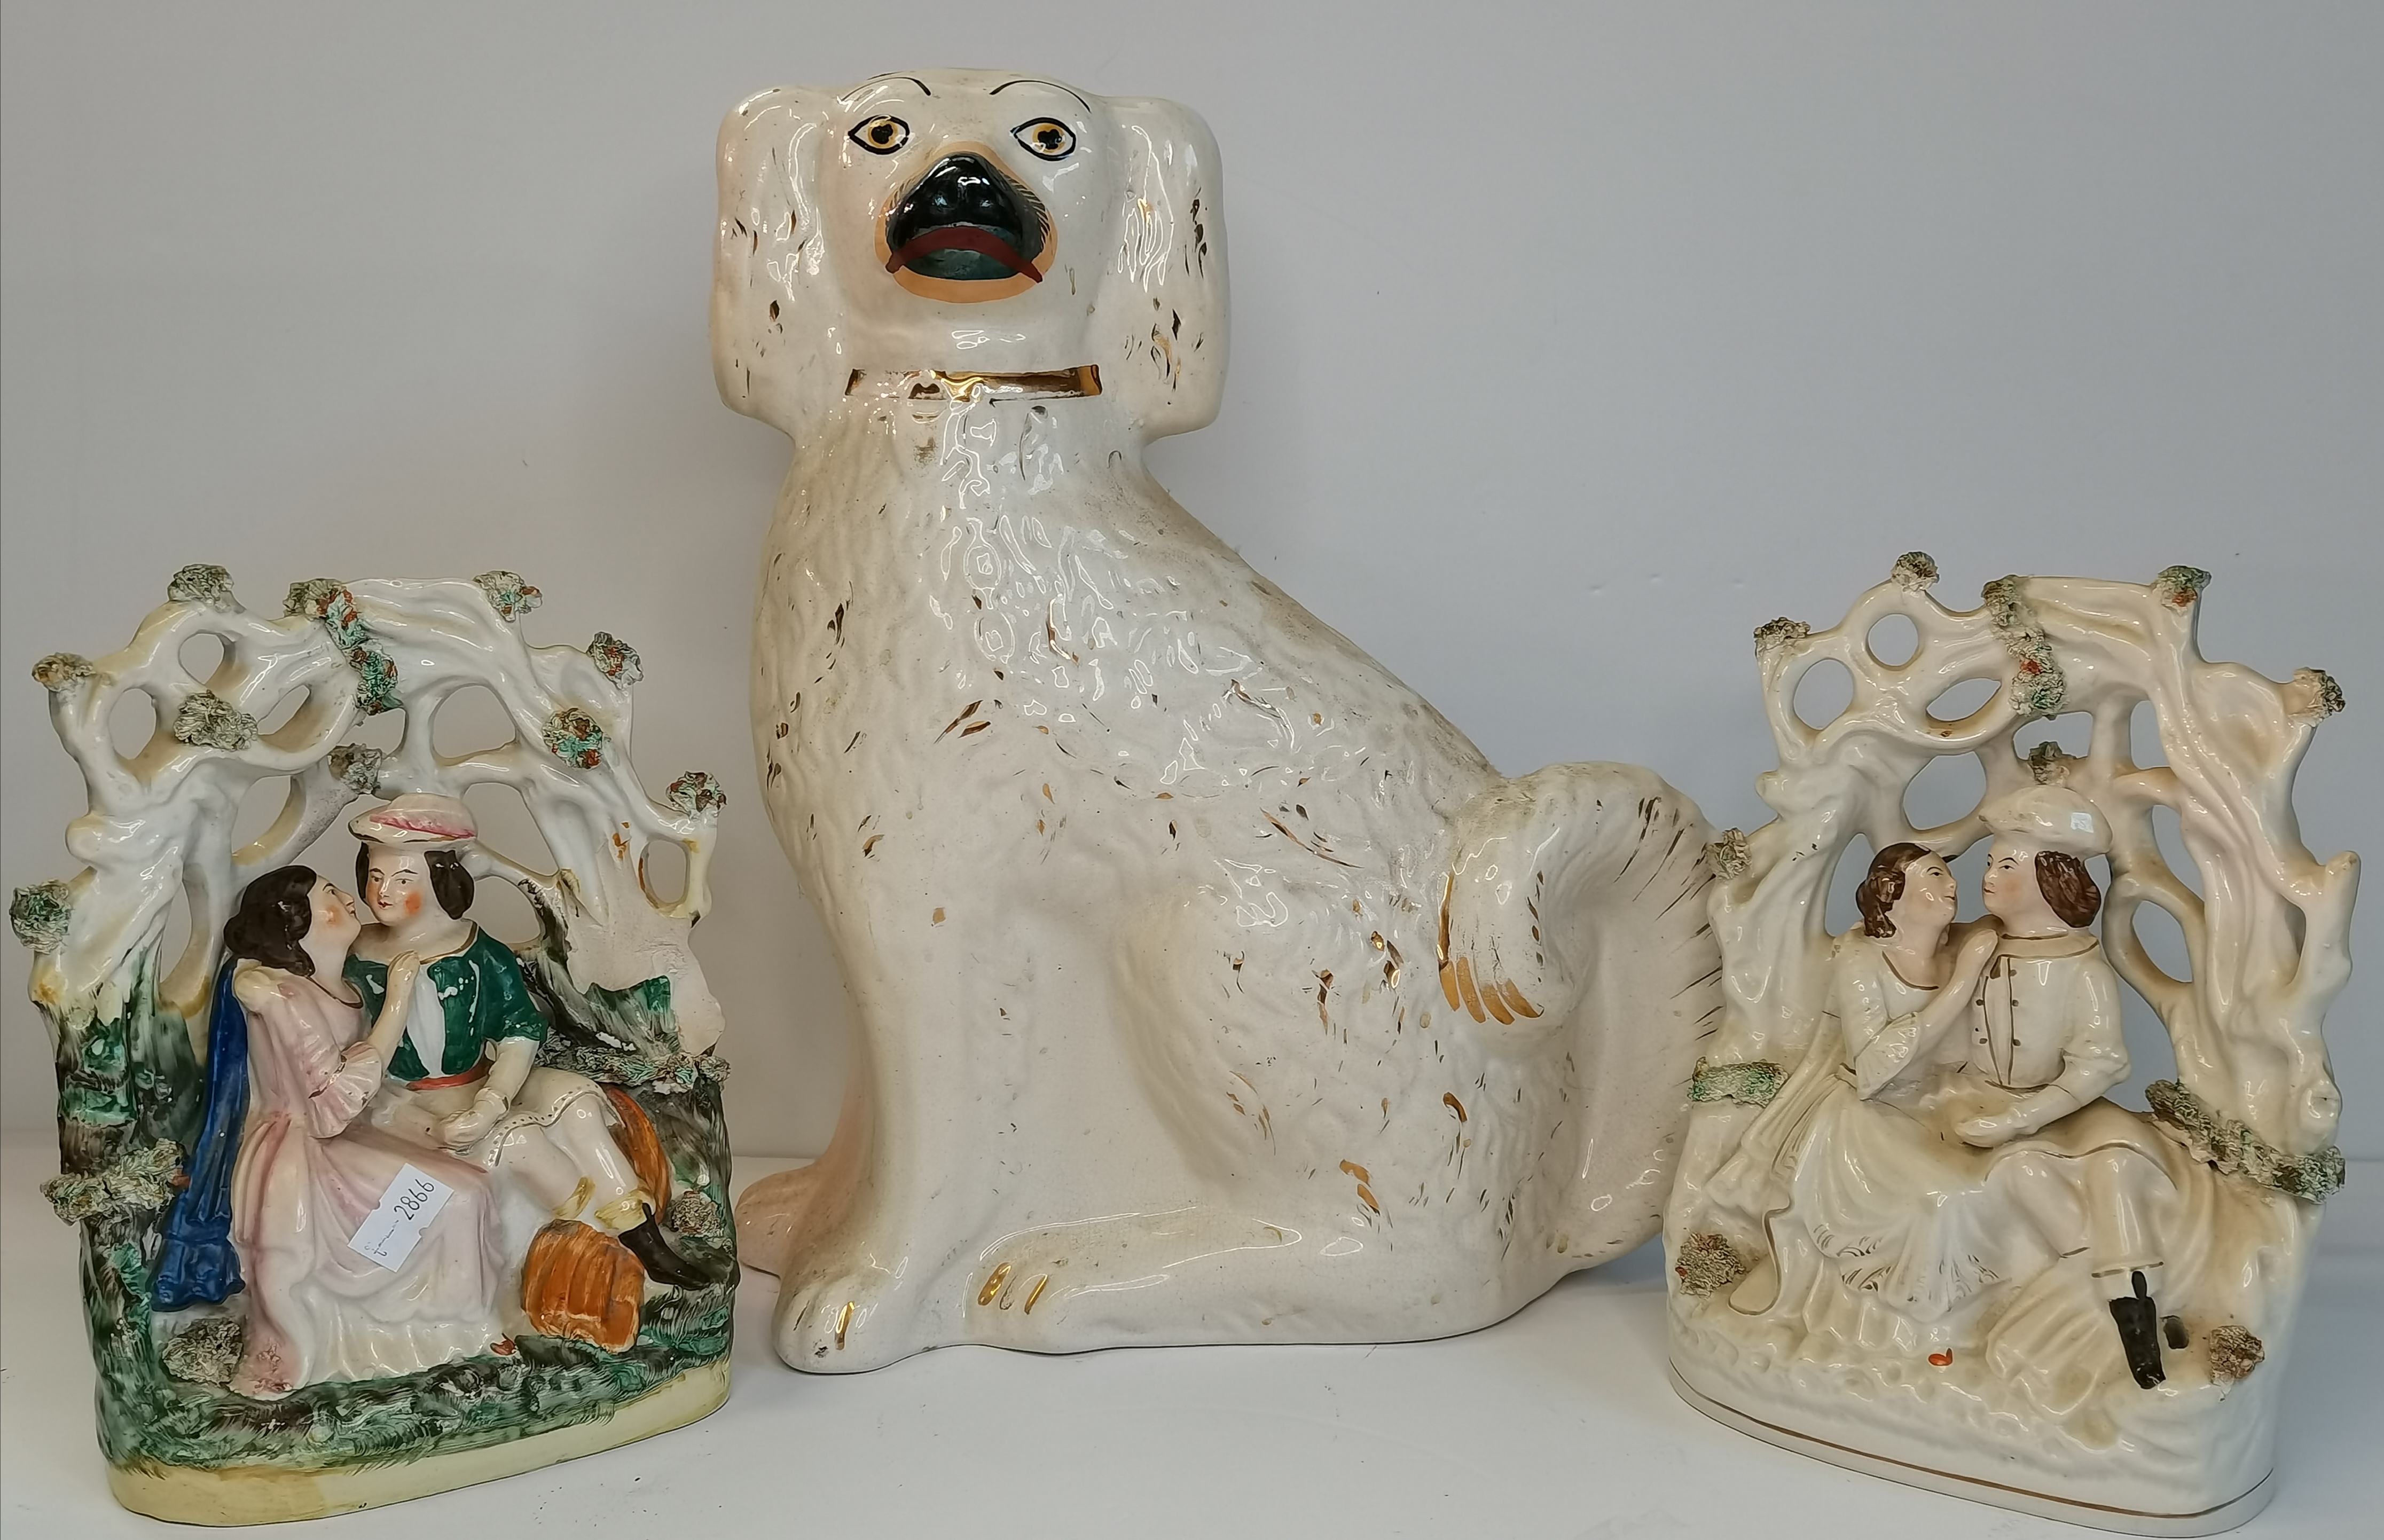 A similar pair of Staffordshire figures plus large